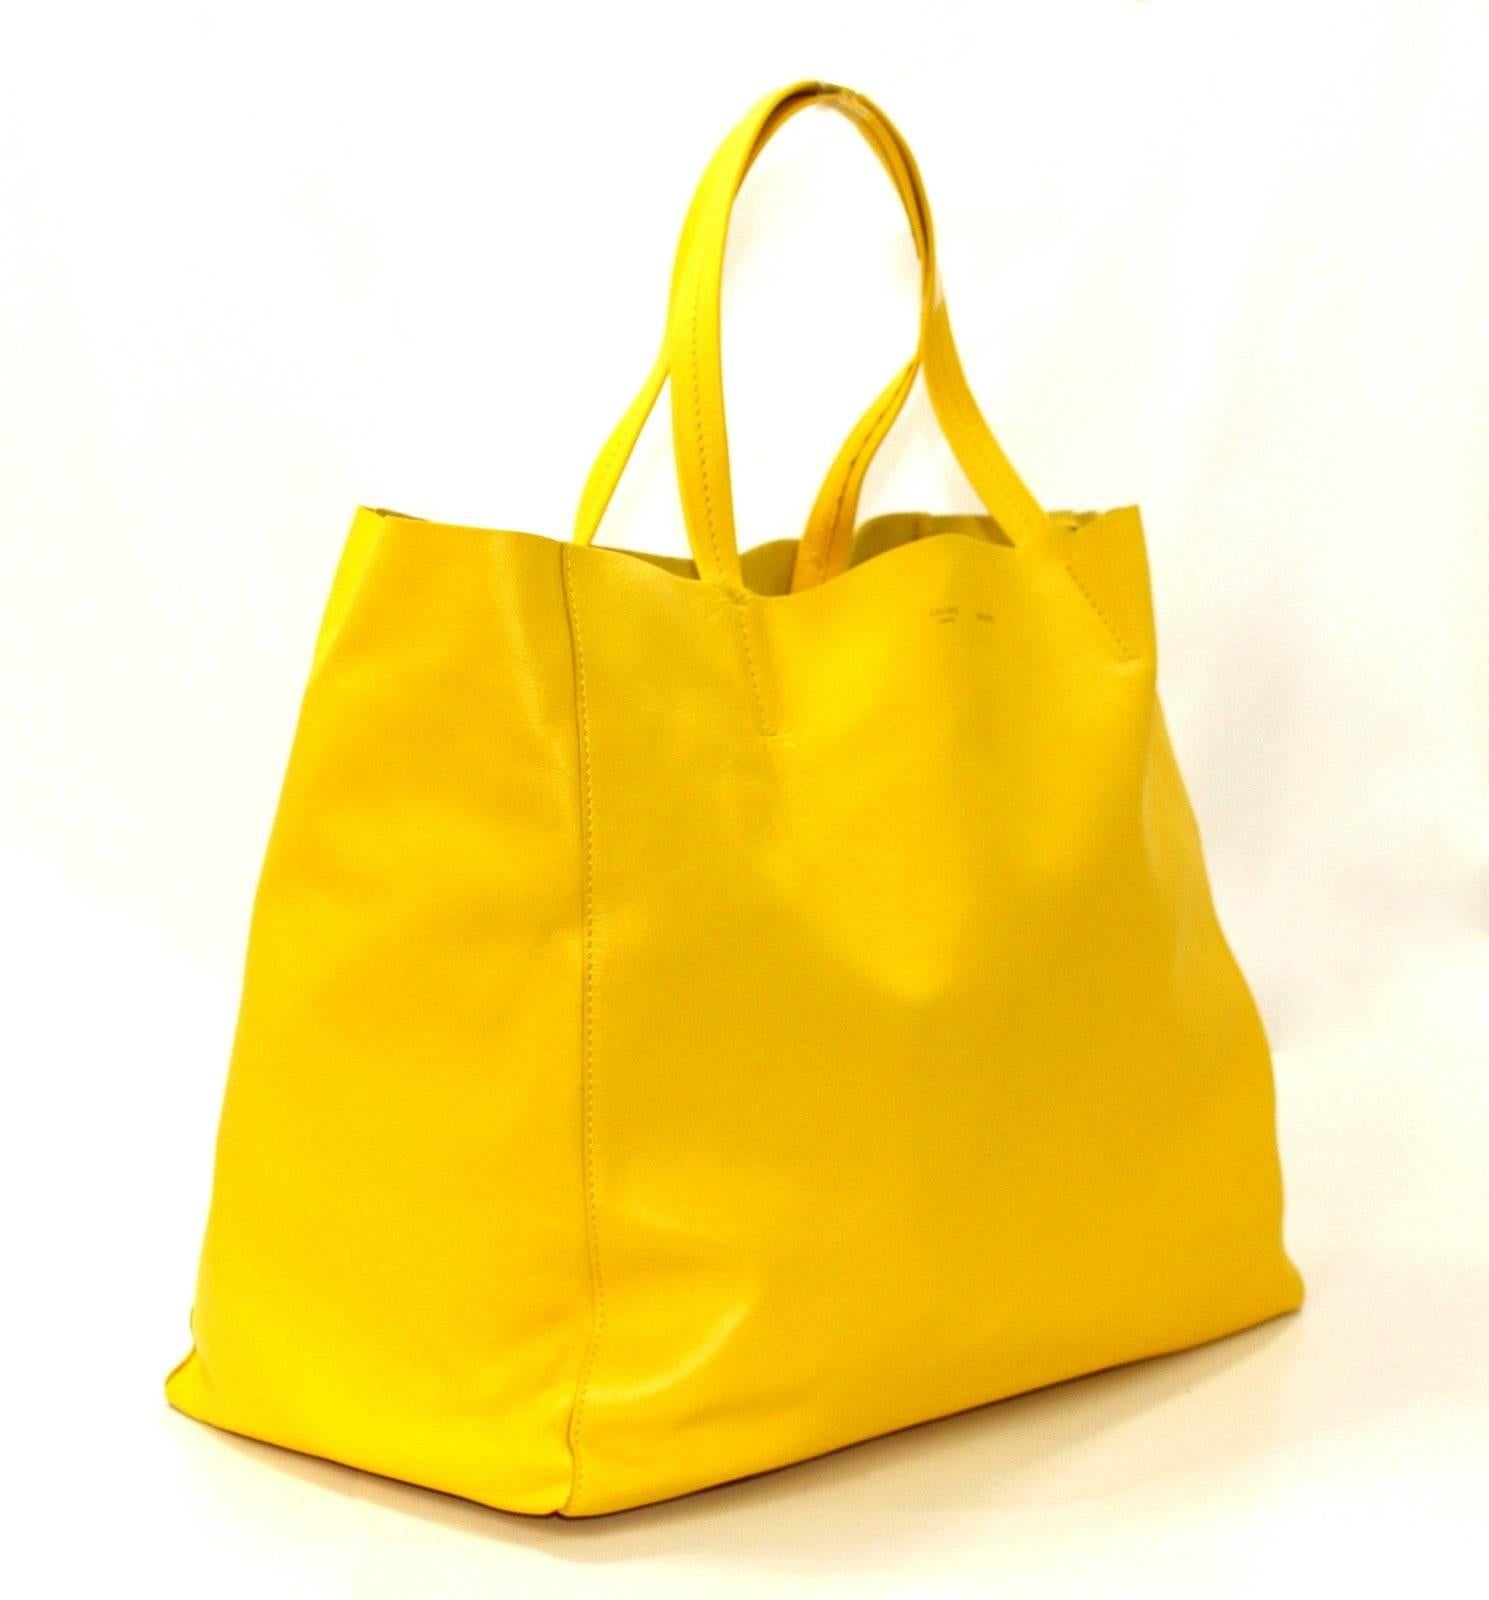 Celine Yellow Lambskin Horizontal Cabas Tote- Brand New, Retail $1,300.00
Iconic style from Celine in extremely desirable care free Sun Yellow.  
Lambskin horizontal tote in Sun yellow.     Double straps are comfortably carried on the shoulder. 